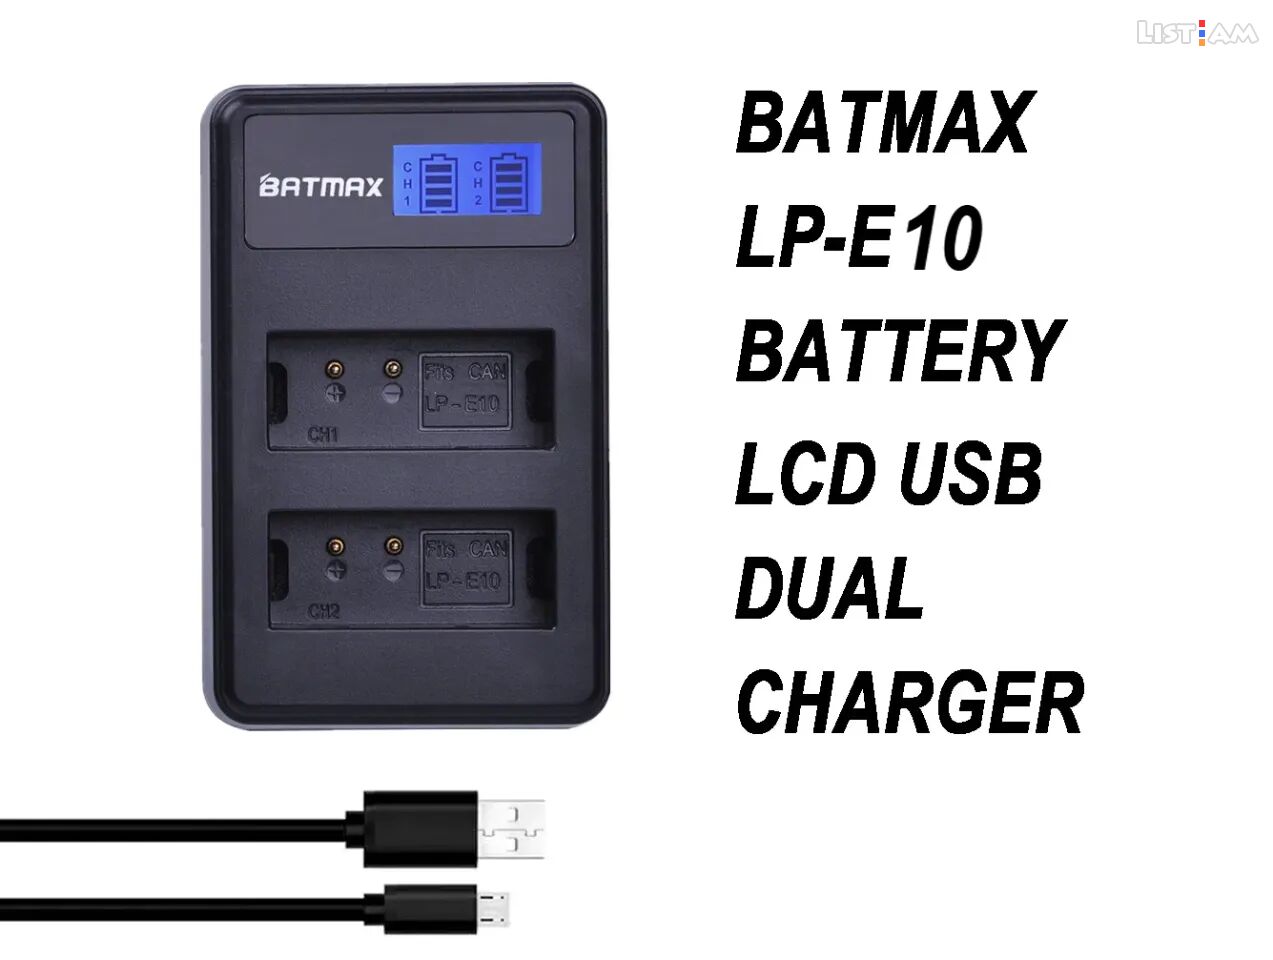 LCD USB Dual Charger